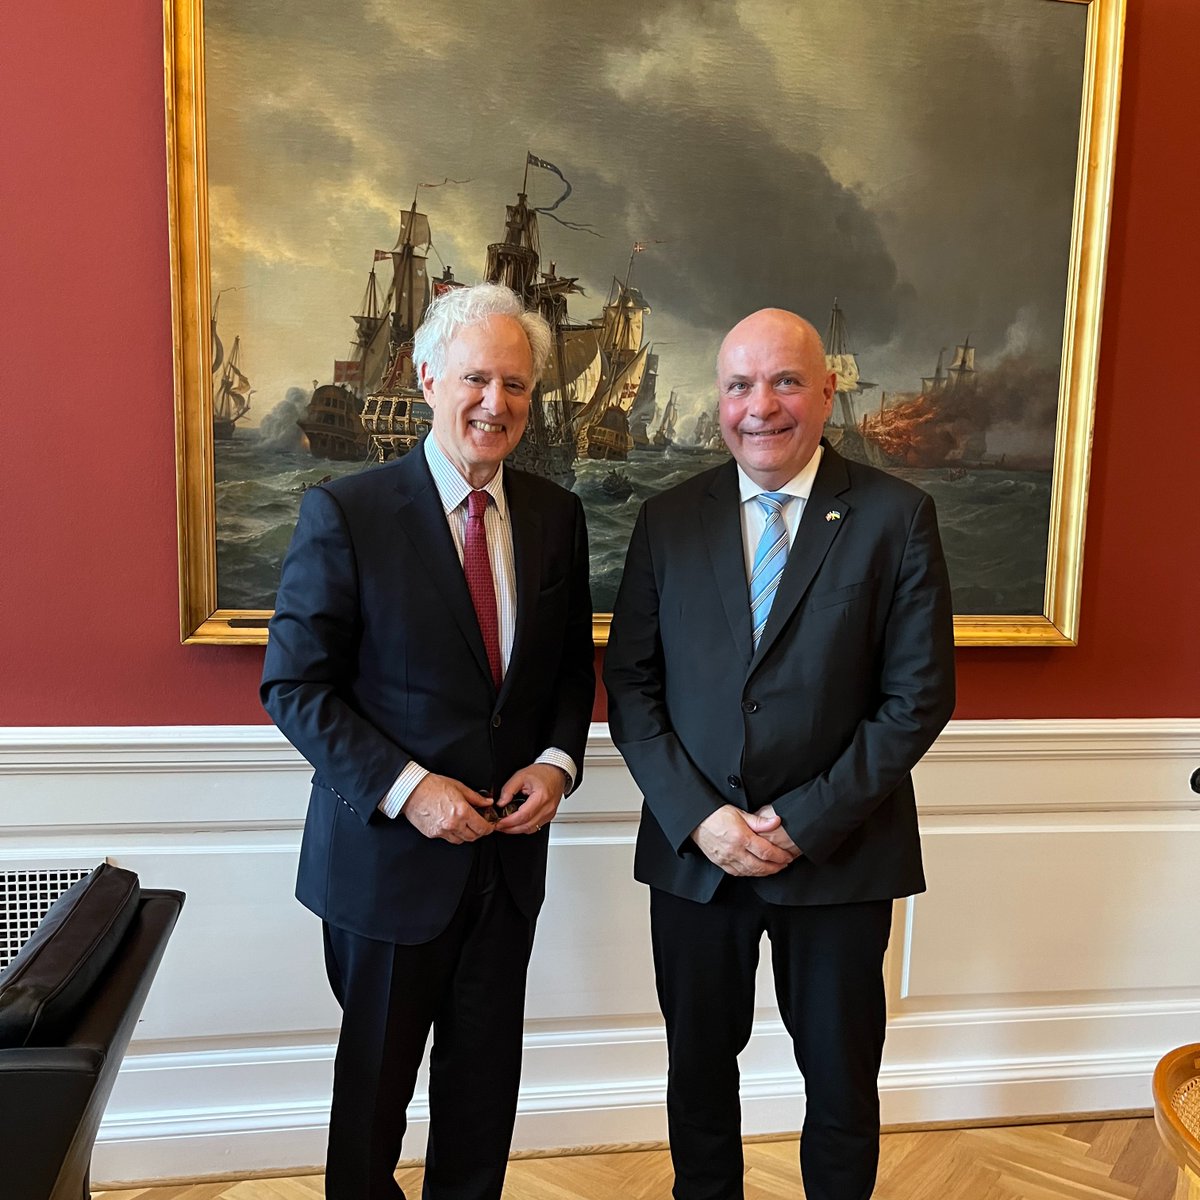 Great meeting with Speaker of the Parliament @SoerenGade yesterday! Always good to talk about the shared values and strong cooperation between the U.S. and Denmark. 🇺🇸 🇩🇰